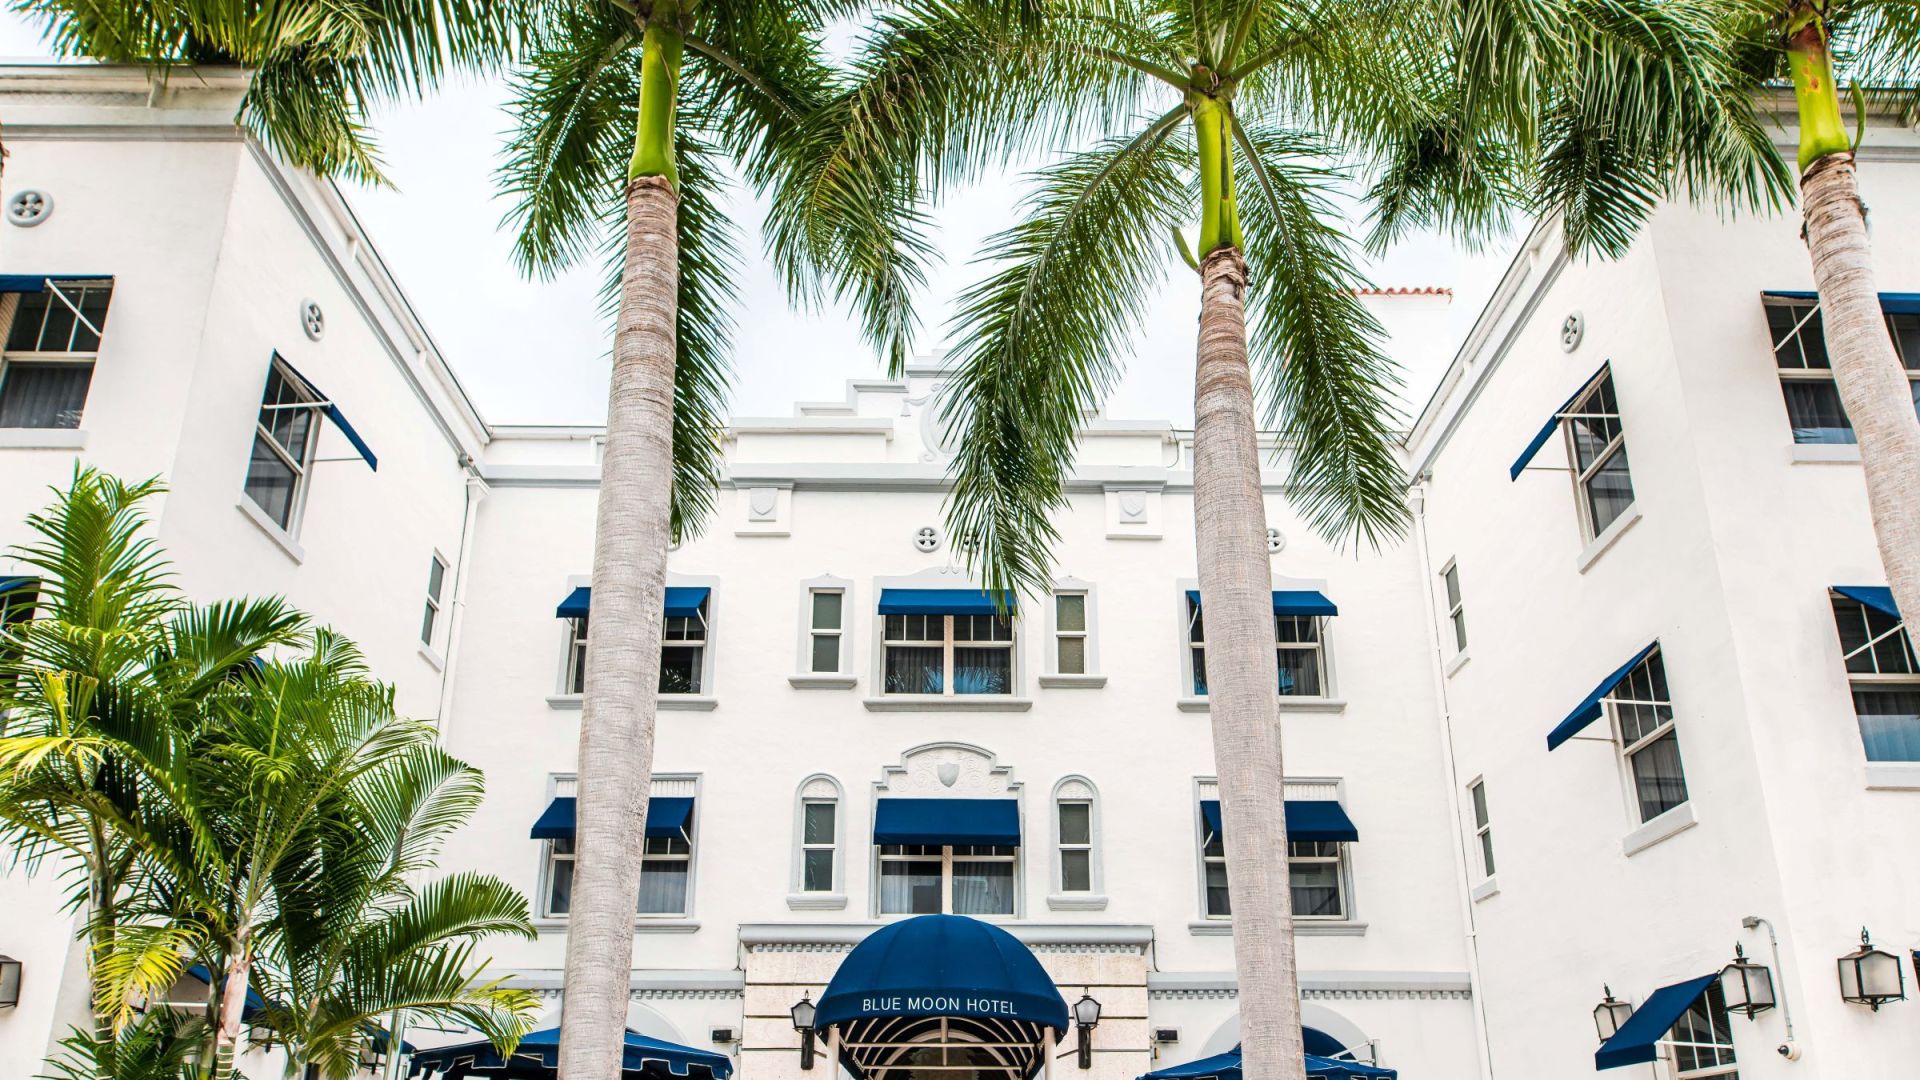 A Group Of Palm Trees In Front Of A White Building